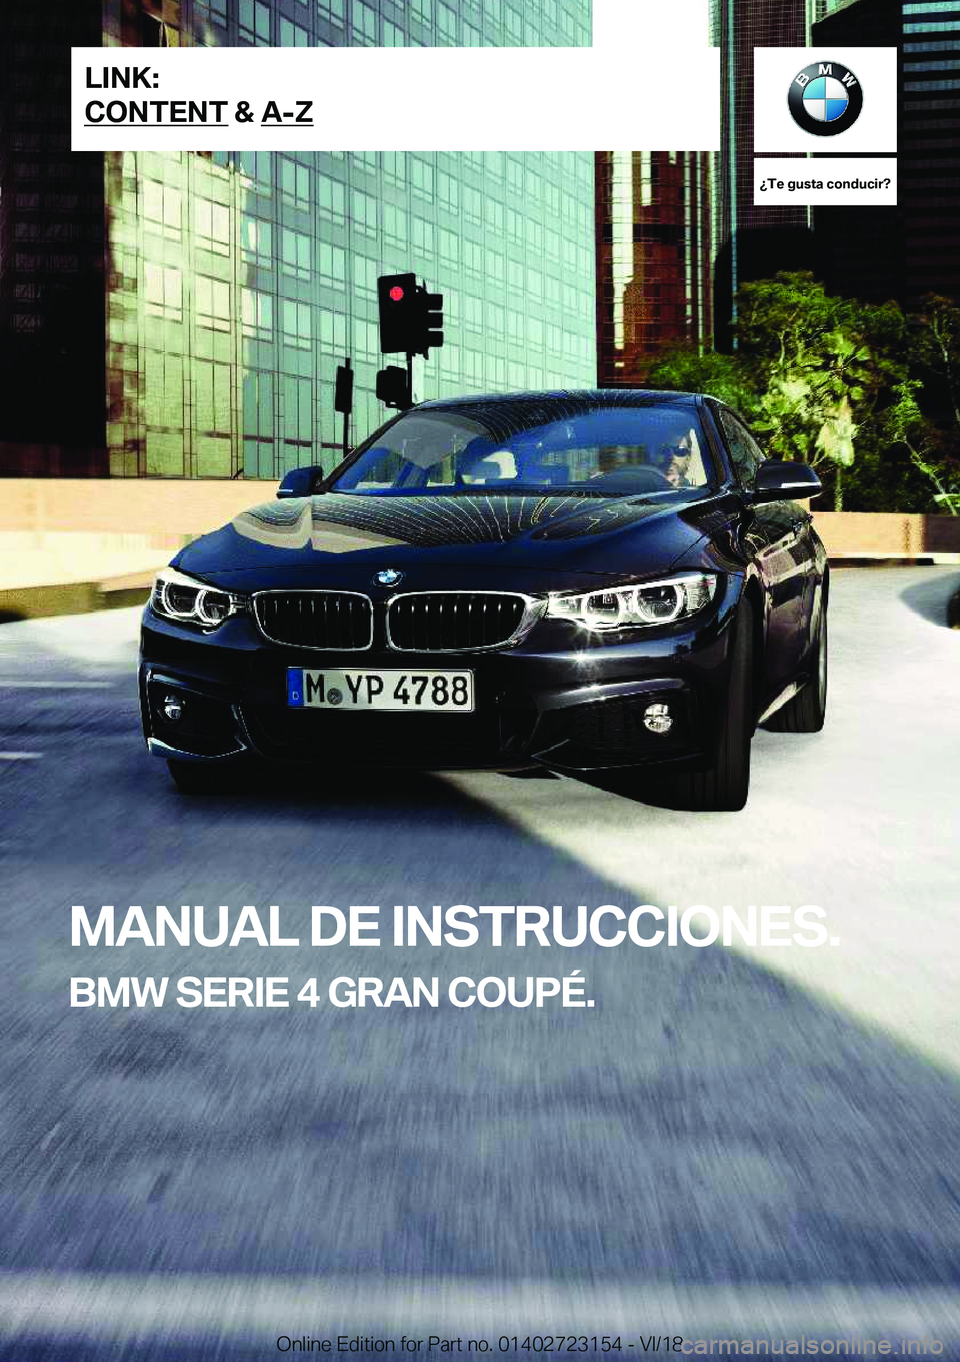 BMW 4 SERIES COUPE 2019  Manuales de Empleo (in Spanish) ��T�e��g�u�s�t�a��c�o�n�d�u�c�i�r� 
�M�A�N�U�A�L��D�E��I�N�S�T�R�U�C�C�I�O�N�E�S�.
�B�M�W��S�E�R�I�E��4��G�R�A�N��C�O�U�P�